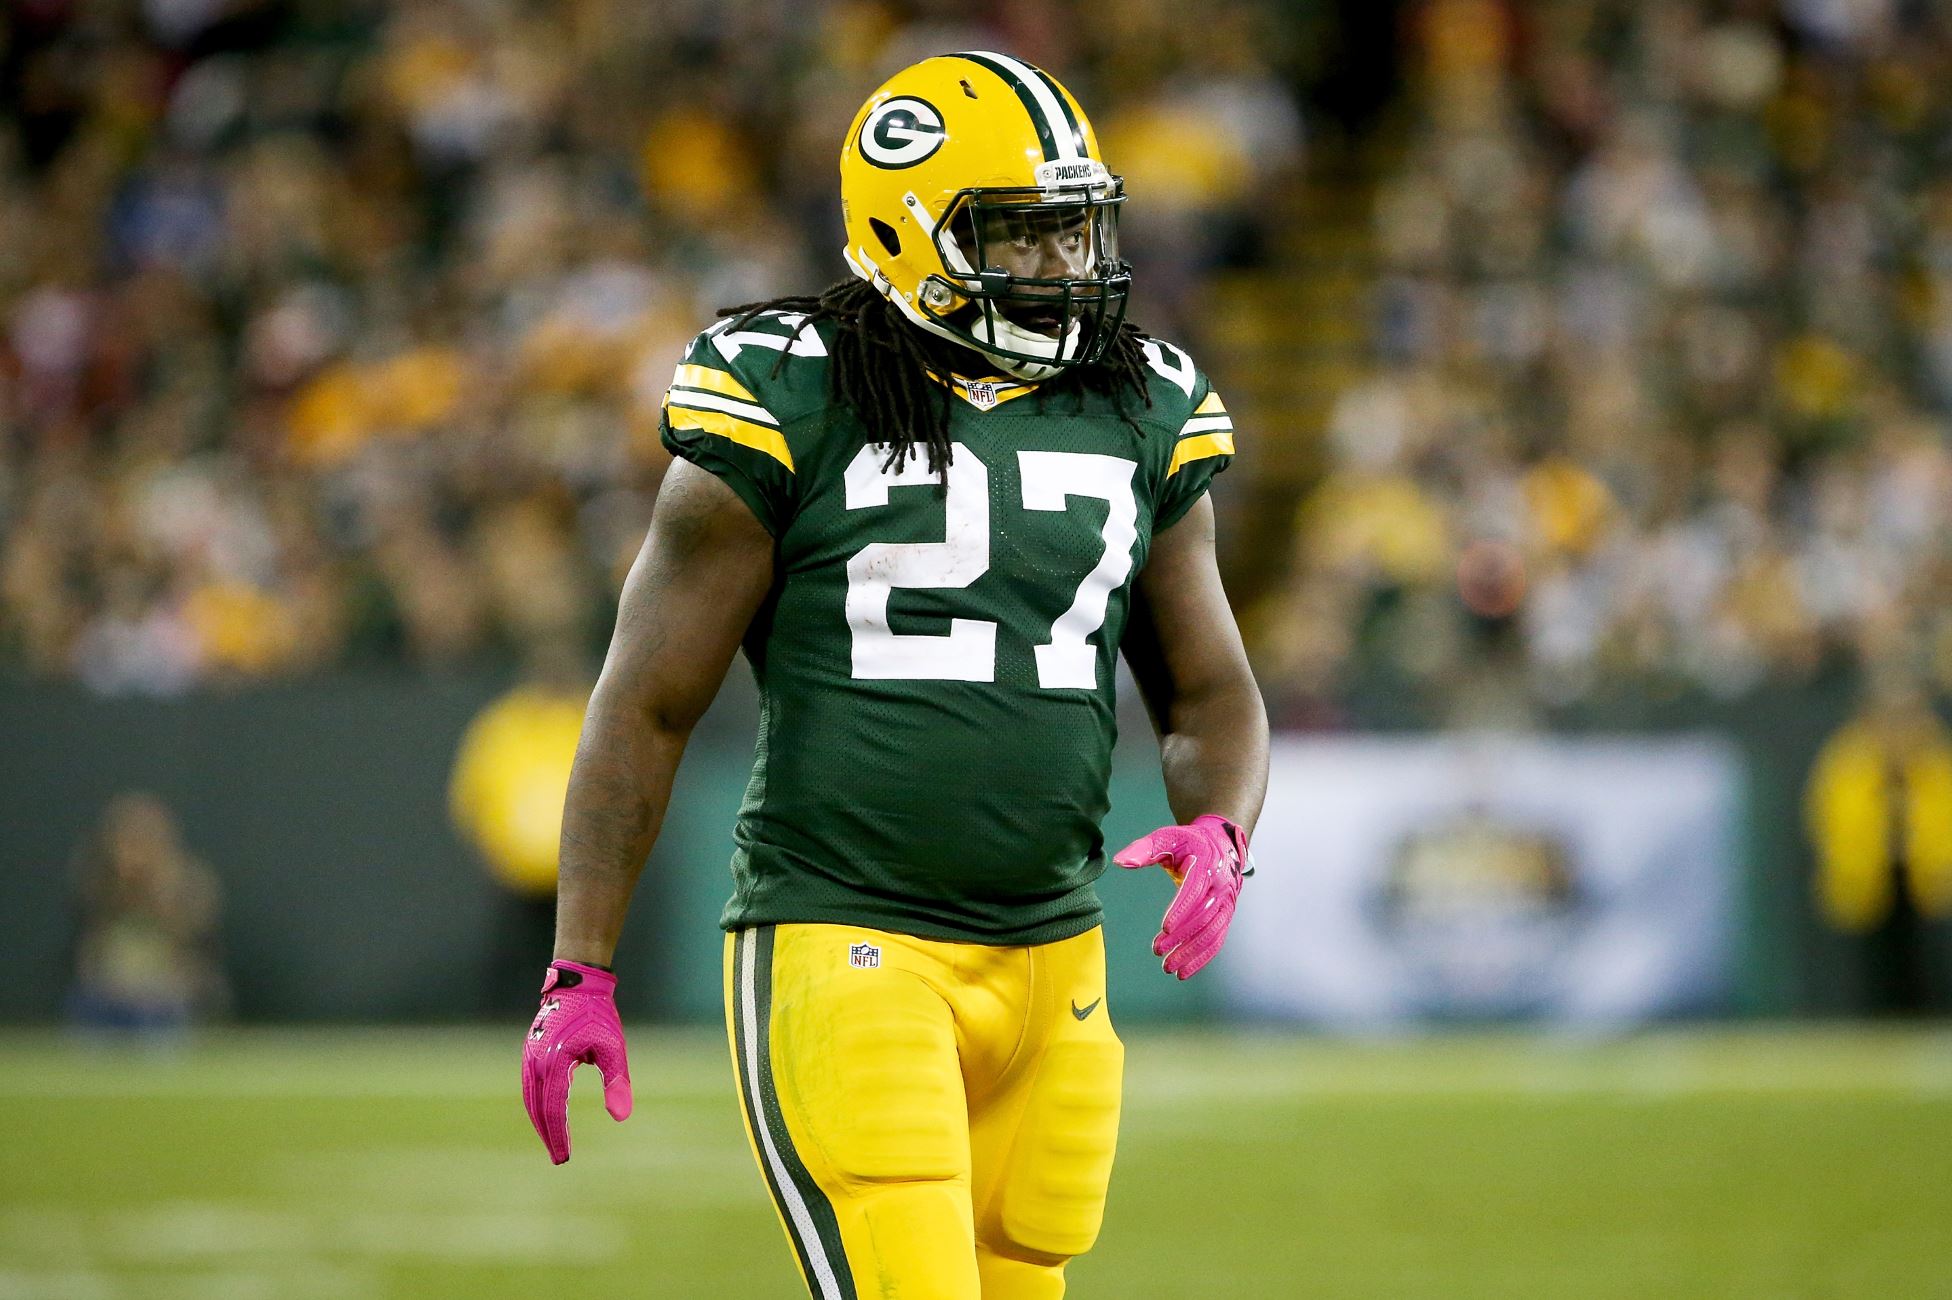 18 Astonishing Facts About Eddie Lacy - Facts.net